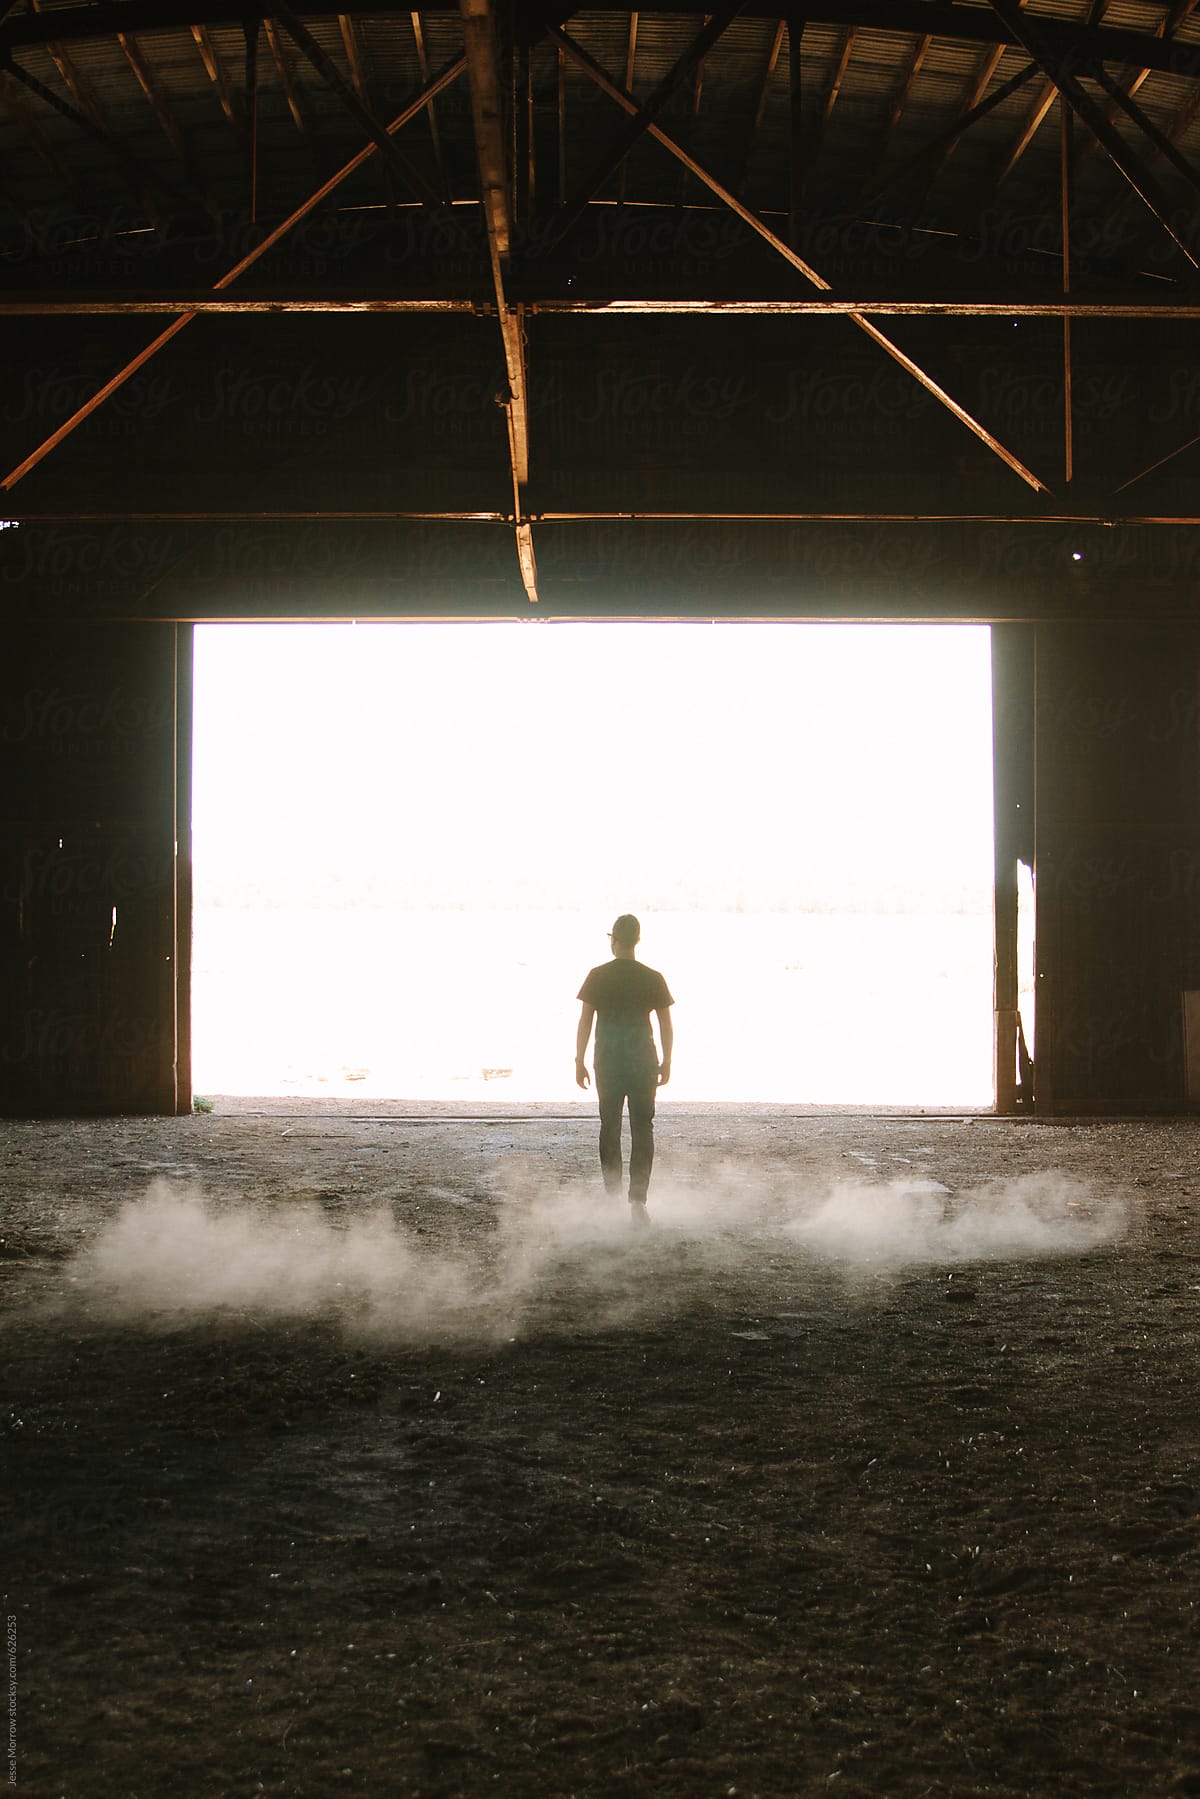 Young man walking through empty barn kicking up dirt floor with bright white behind silhouette